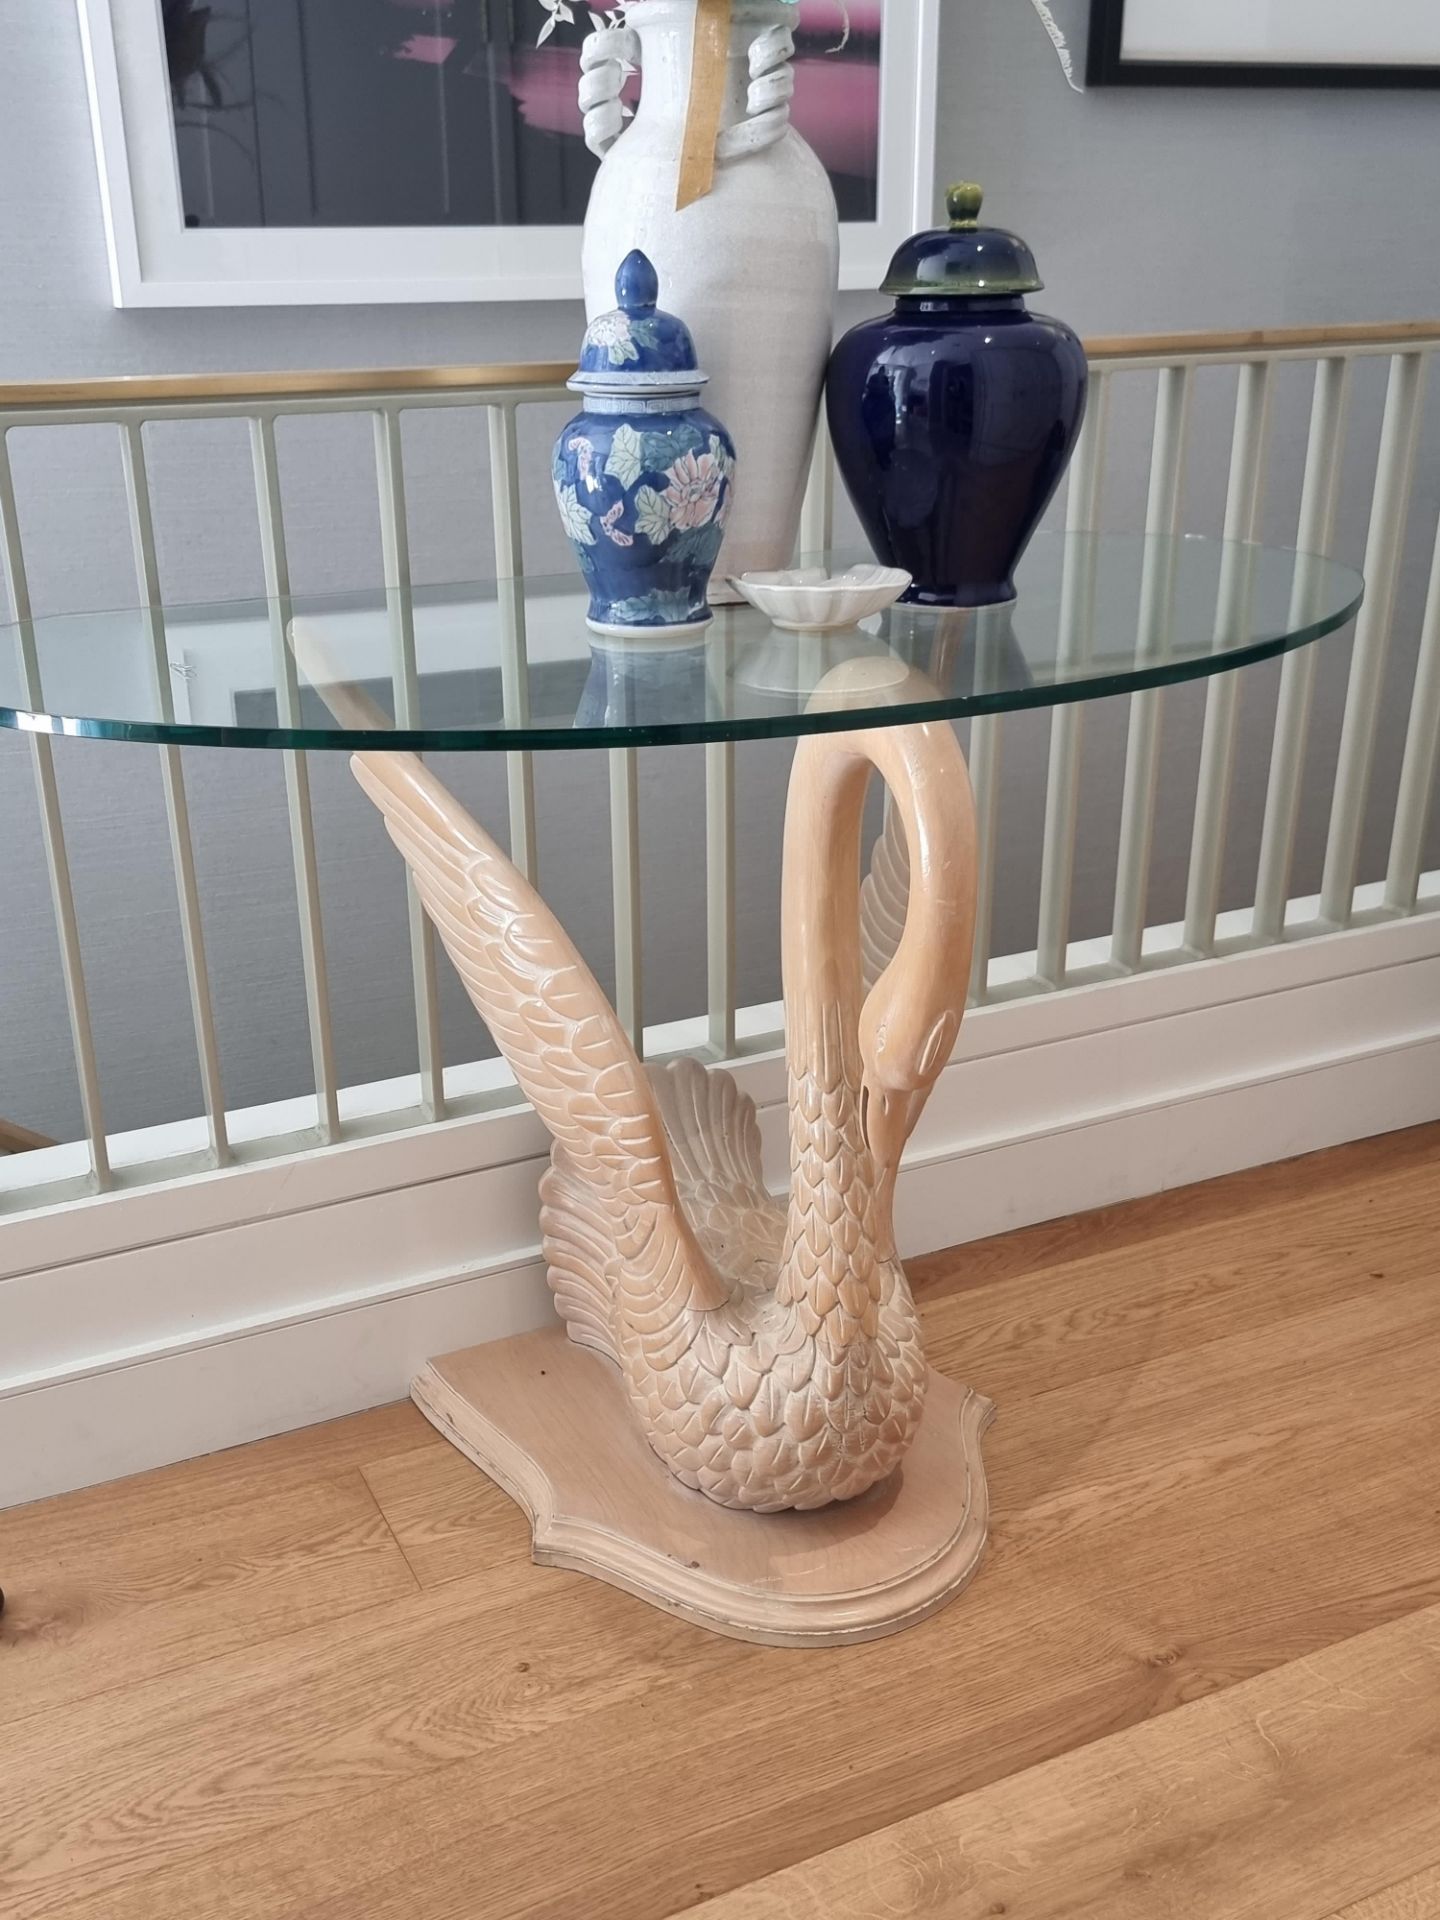 Swan Table Crafted In A Decadent Hollywood Regency Styling An intricately carved swan sculpture